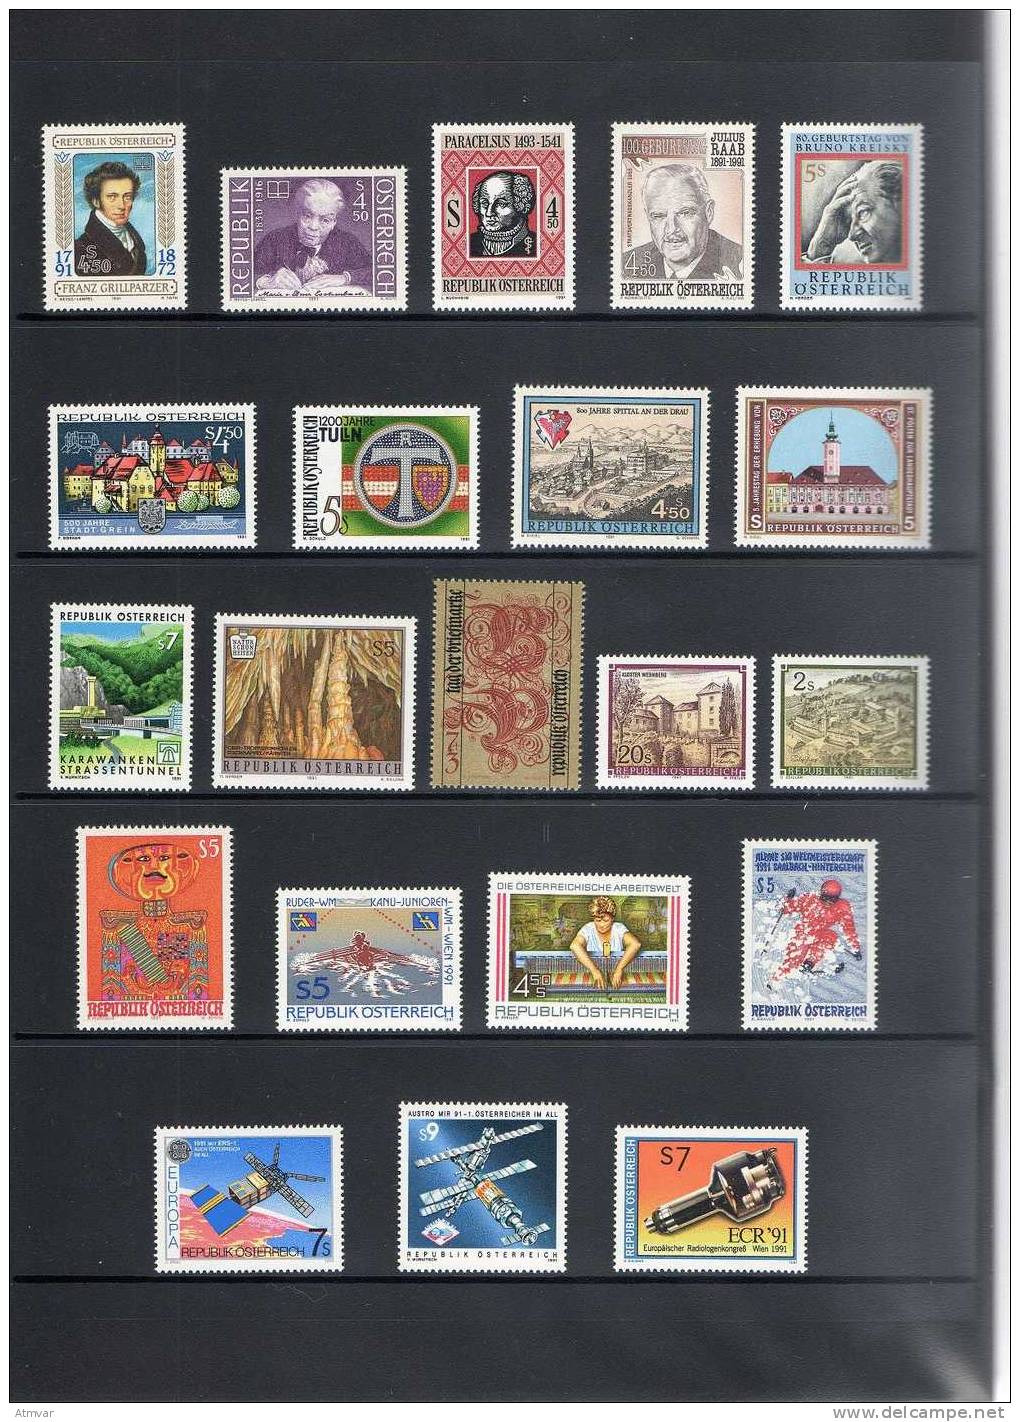 AT502. AUSTRIA - Yearbook 1991 With Mint Stamps / Livre Annuel 1991 Avec Timbres Neufs - Volledige Jaargang